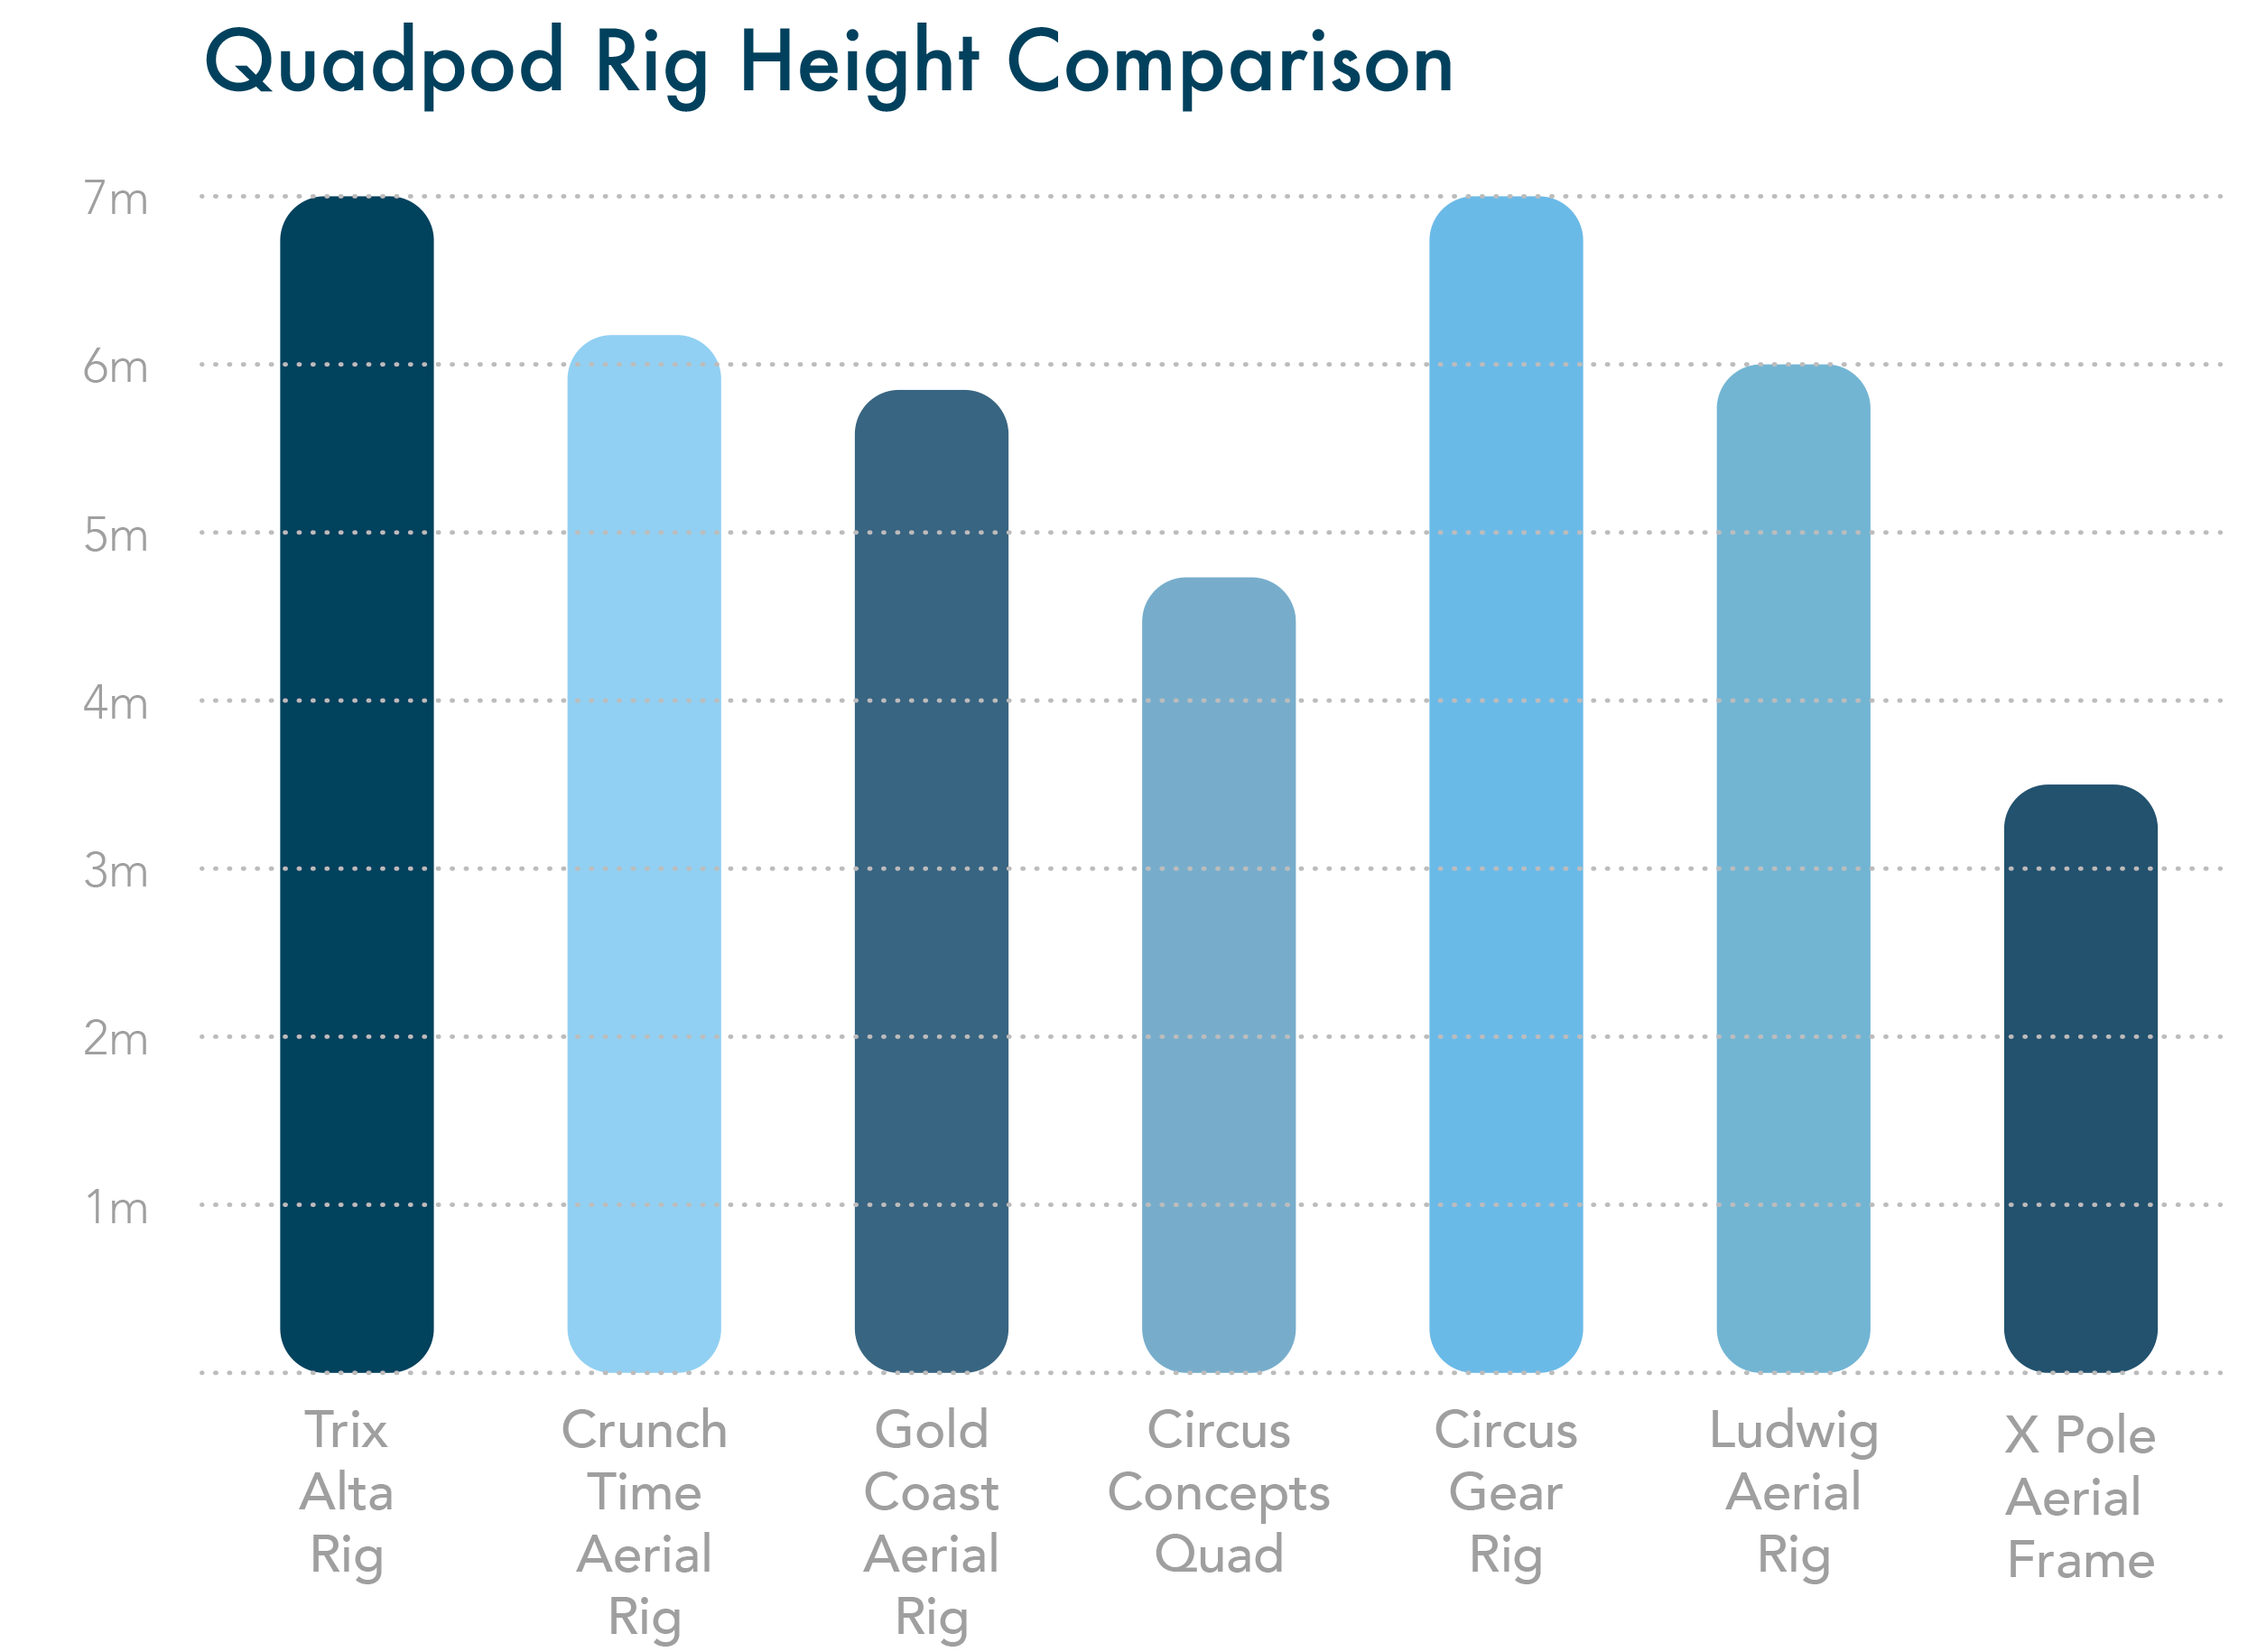 Rig heights vs the Alta Rig